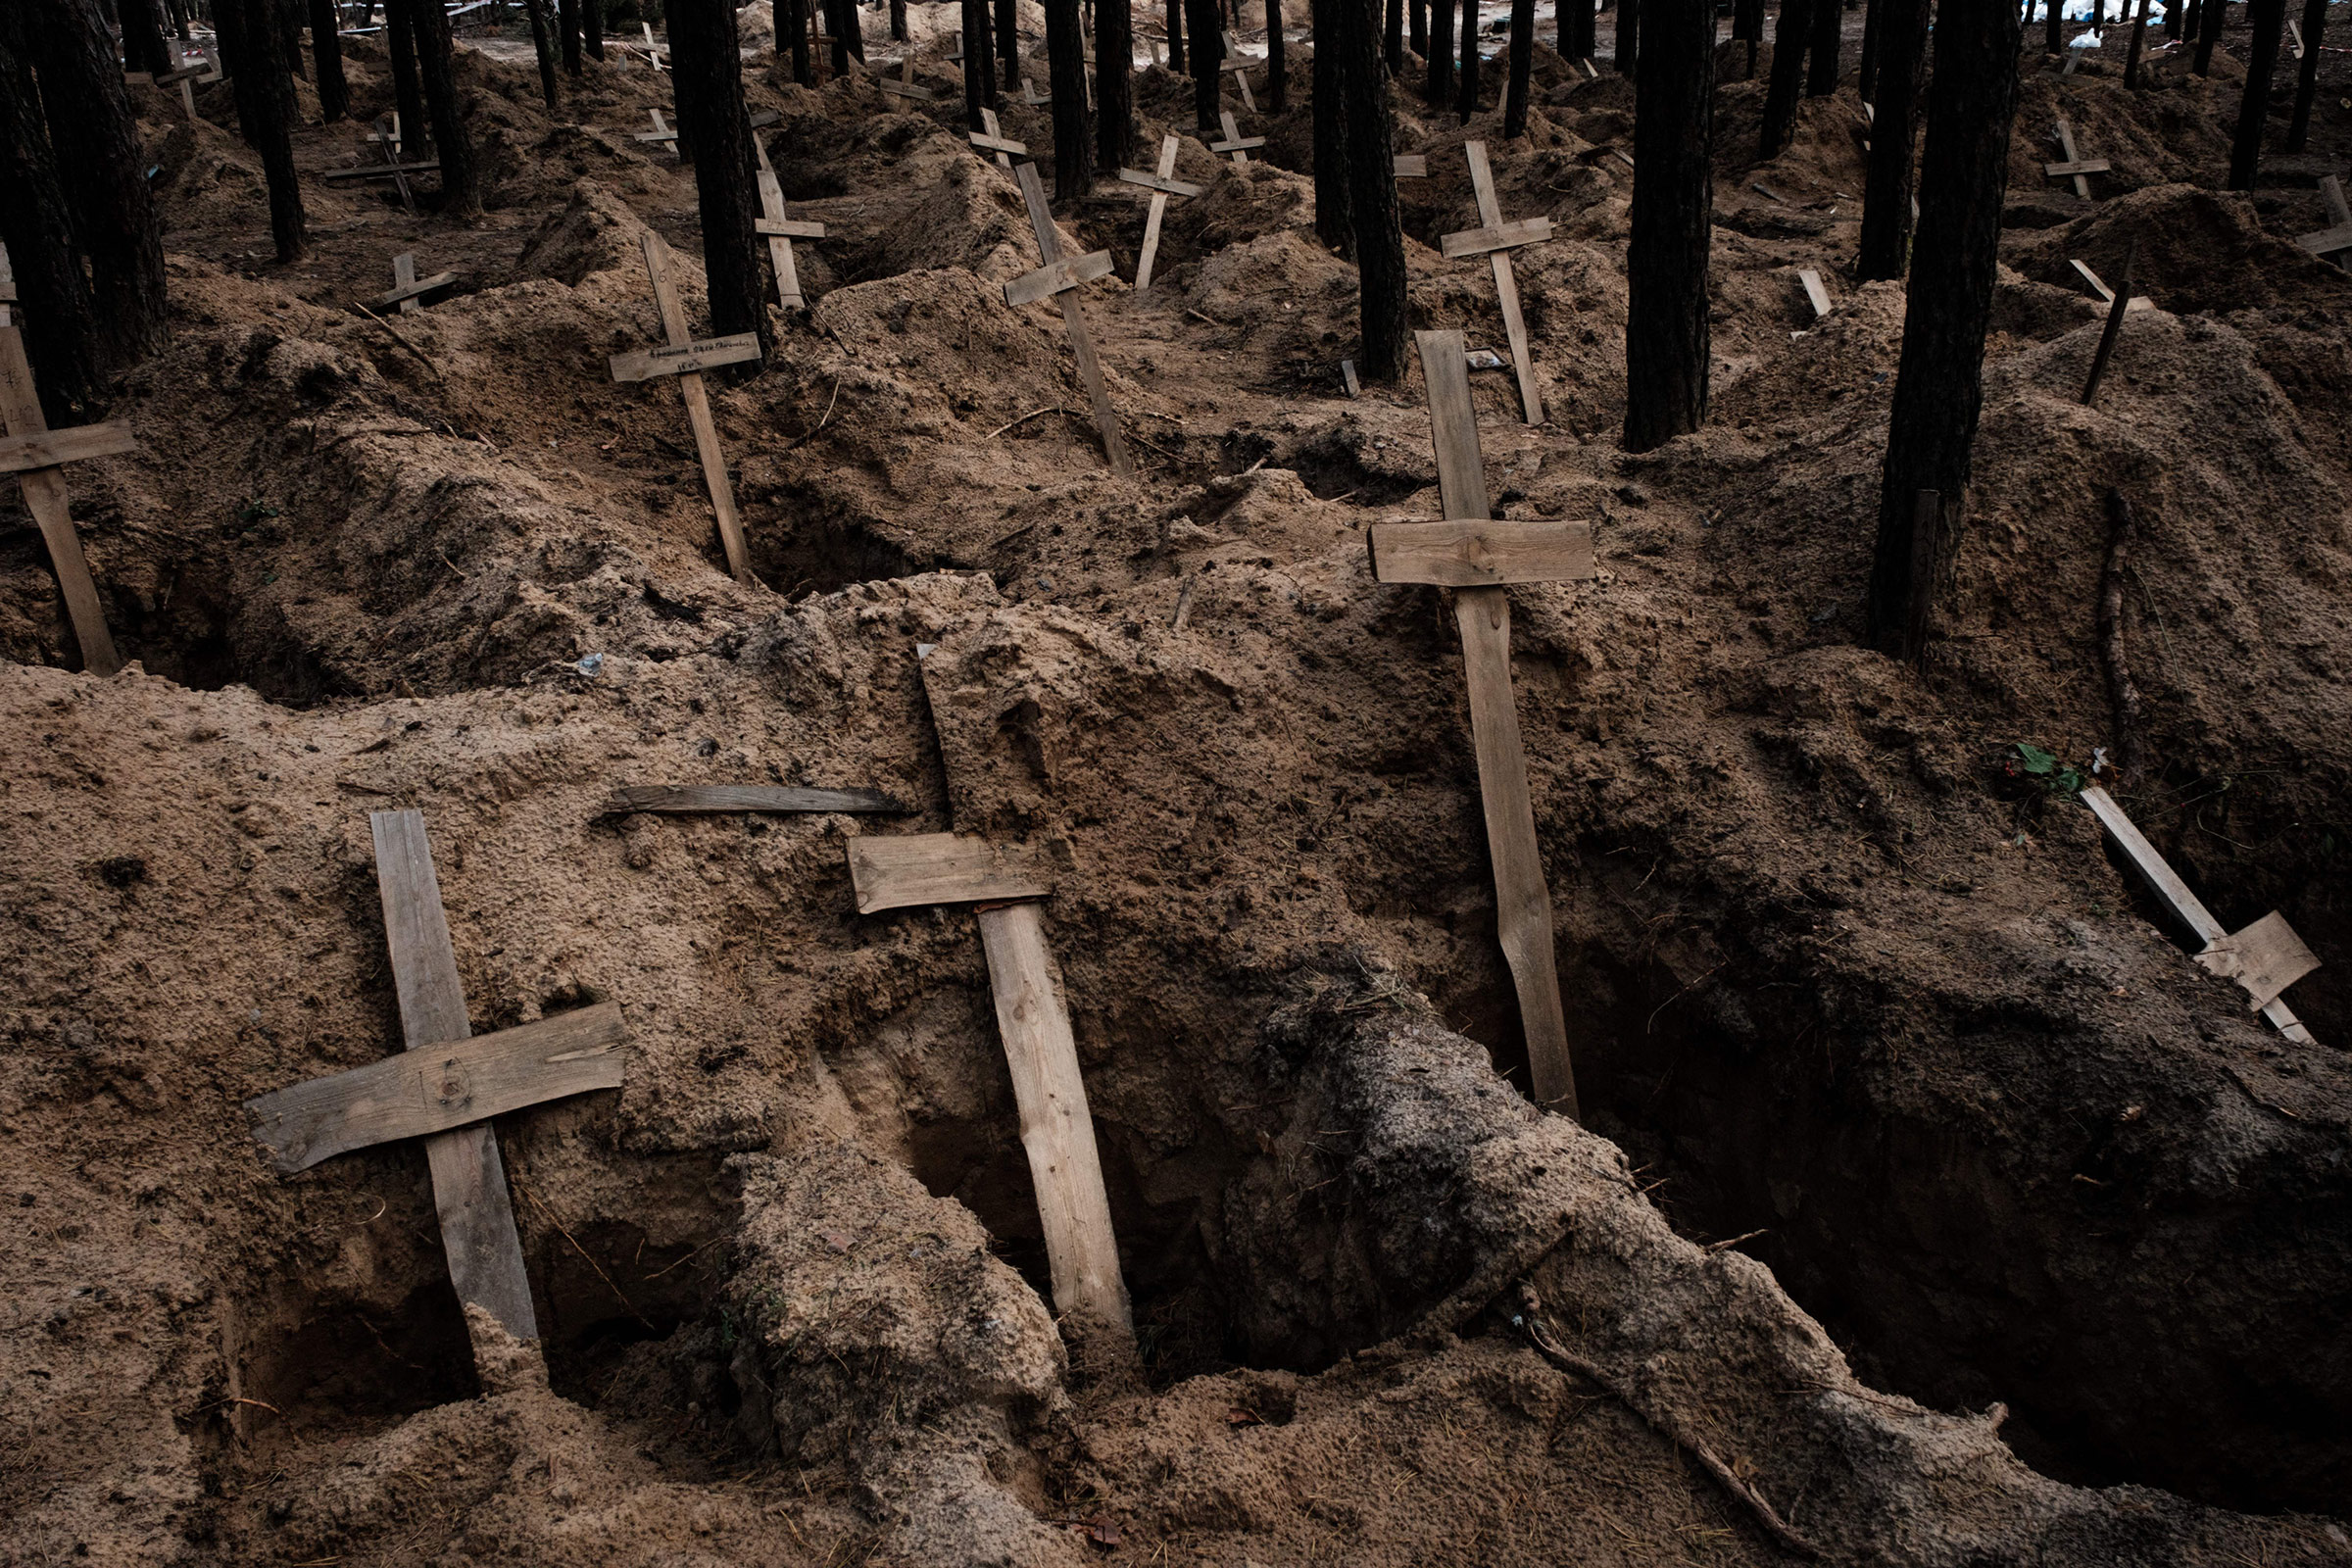 Graves unearthed in the town of Izyum, Sept. 2022, after territory was recaptured from Russian forces. (Yasuyoshi Chiba—AFP/Getty Images)